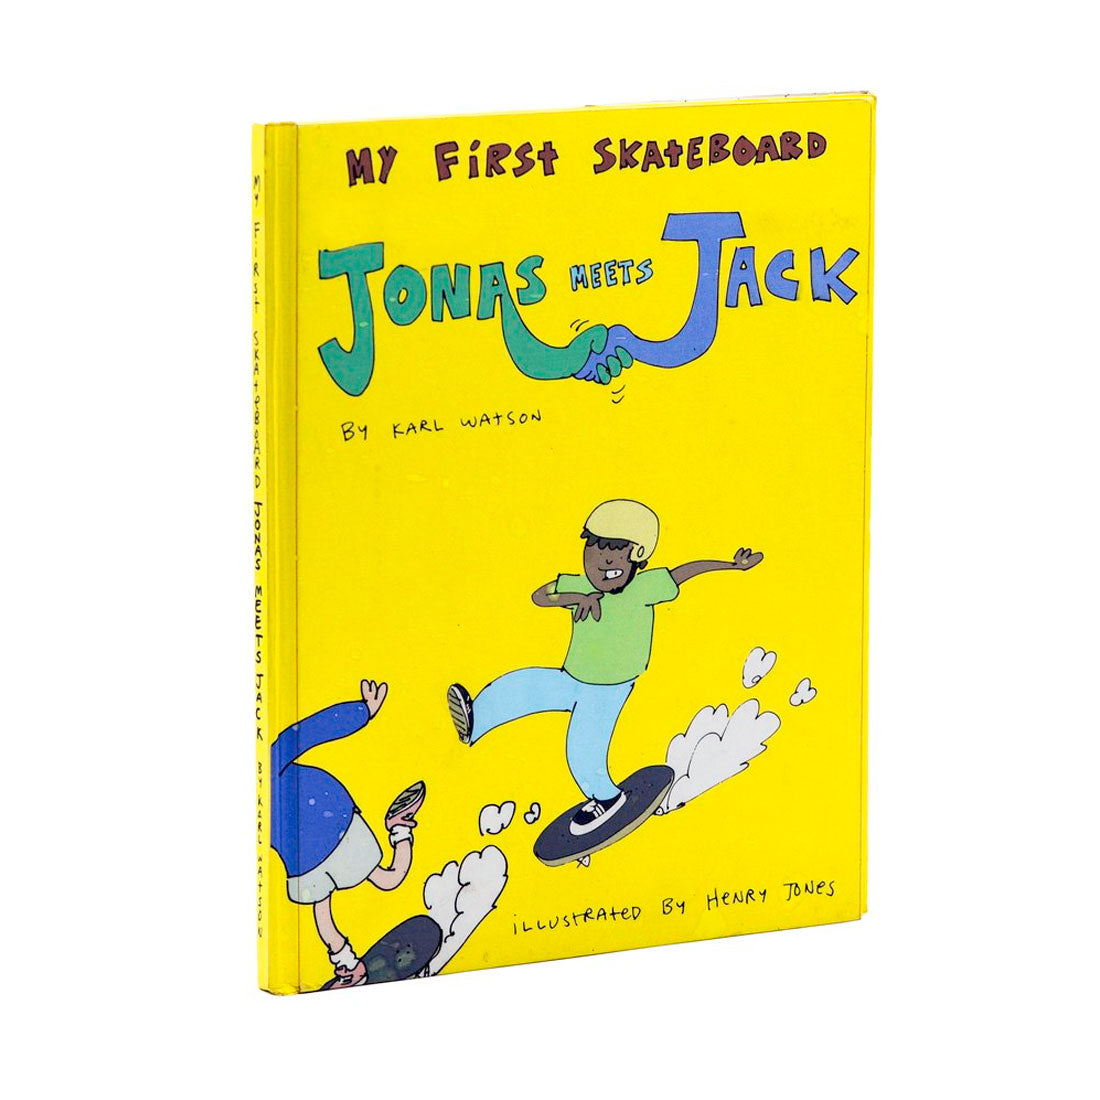 My First Skateboard: Jonas Meets Jack Book Magazines and Books